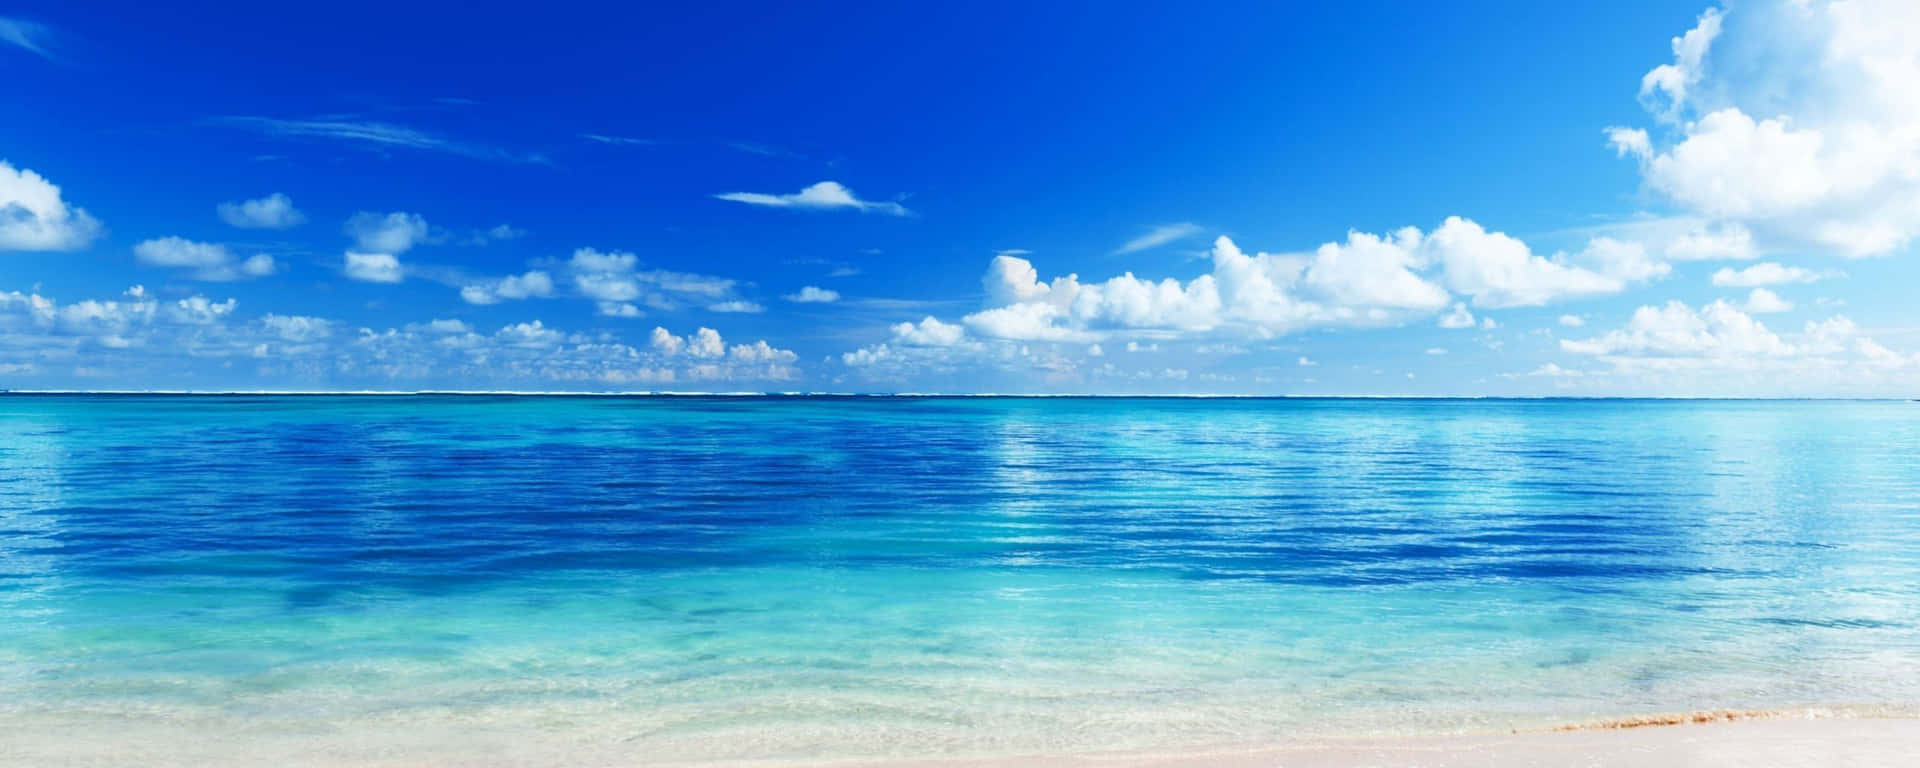 Enjoy a Panoramic Beach View From Your Monitor Wallpaper